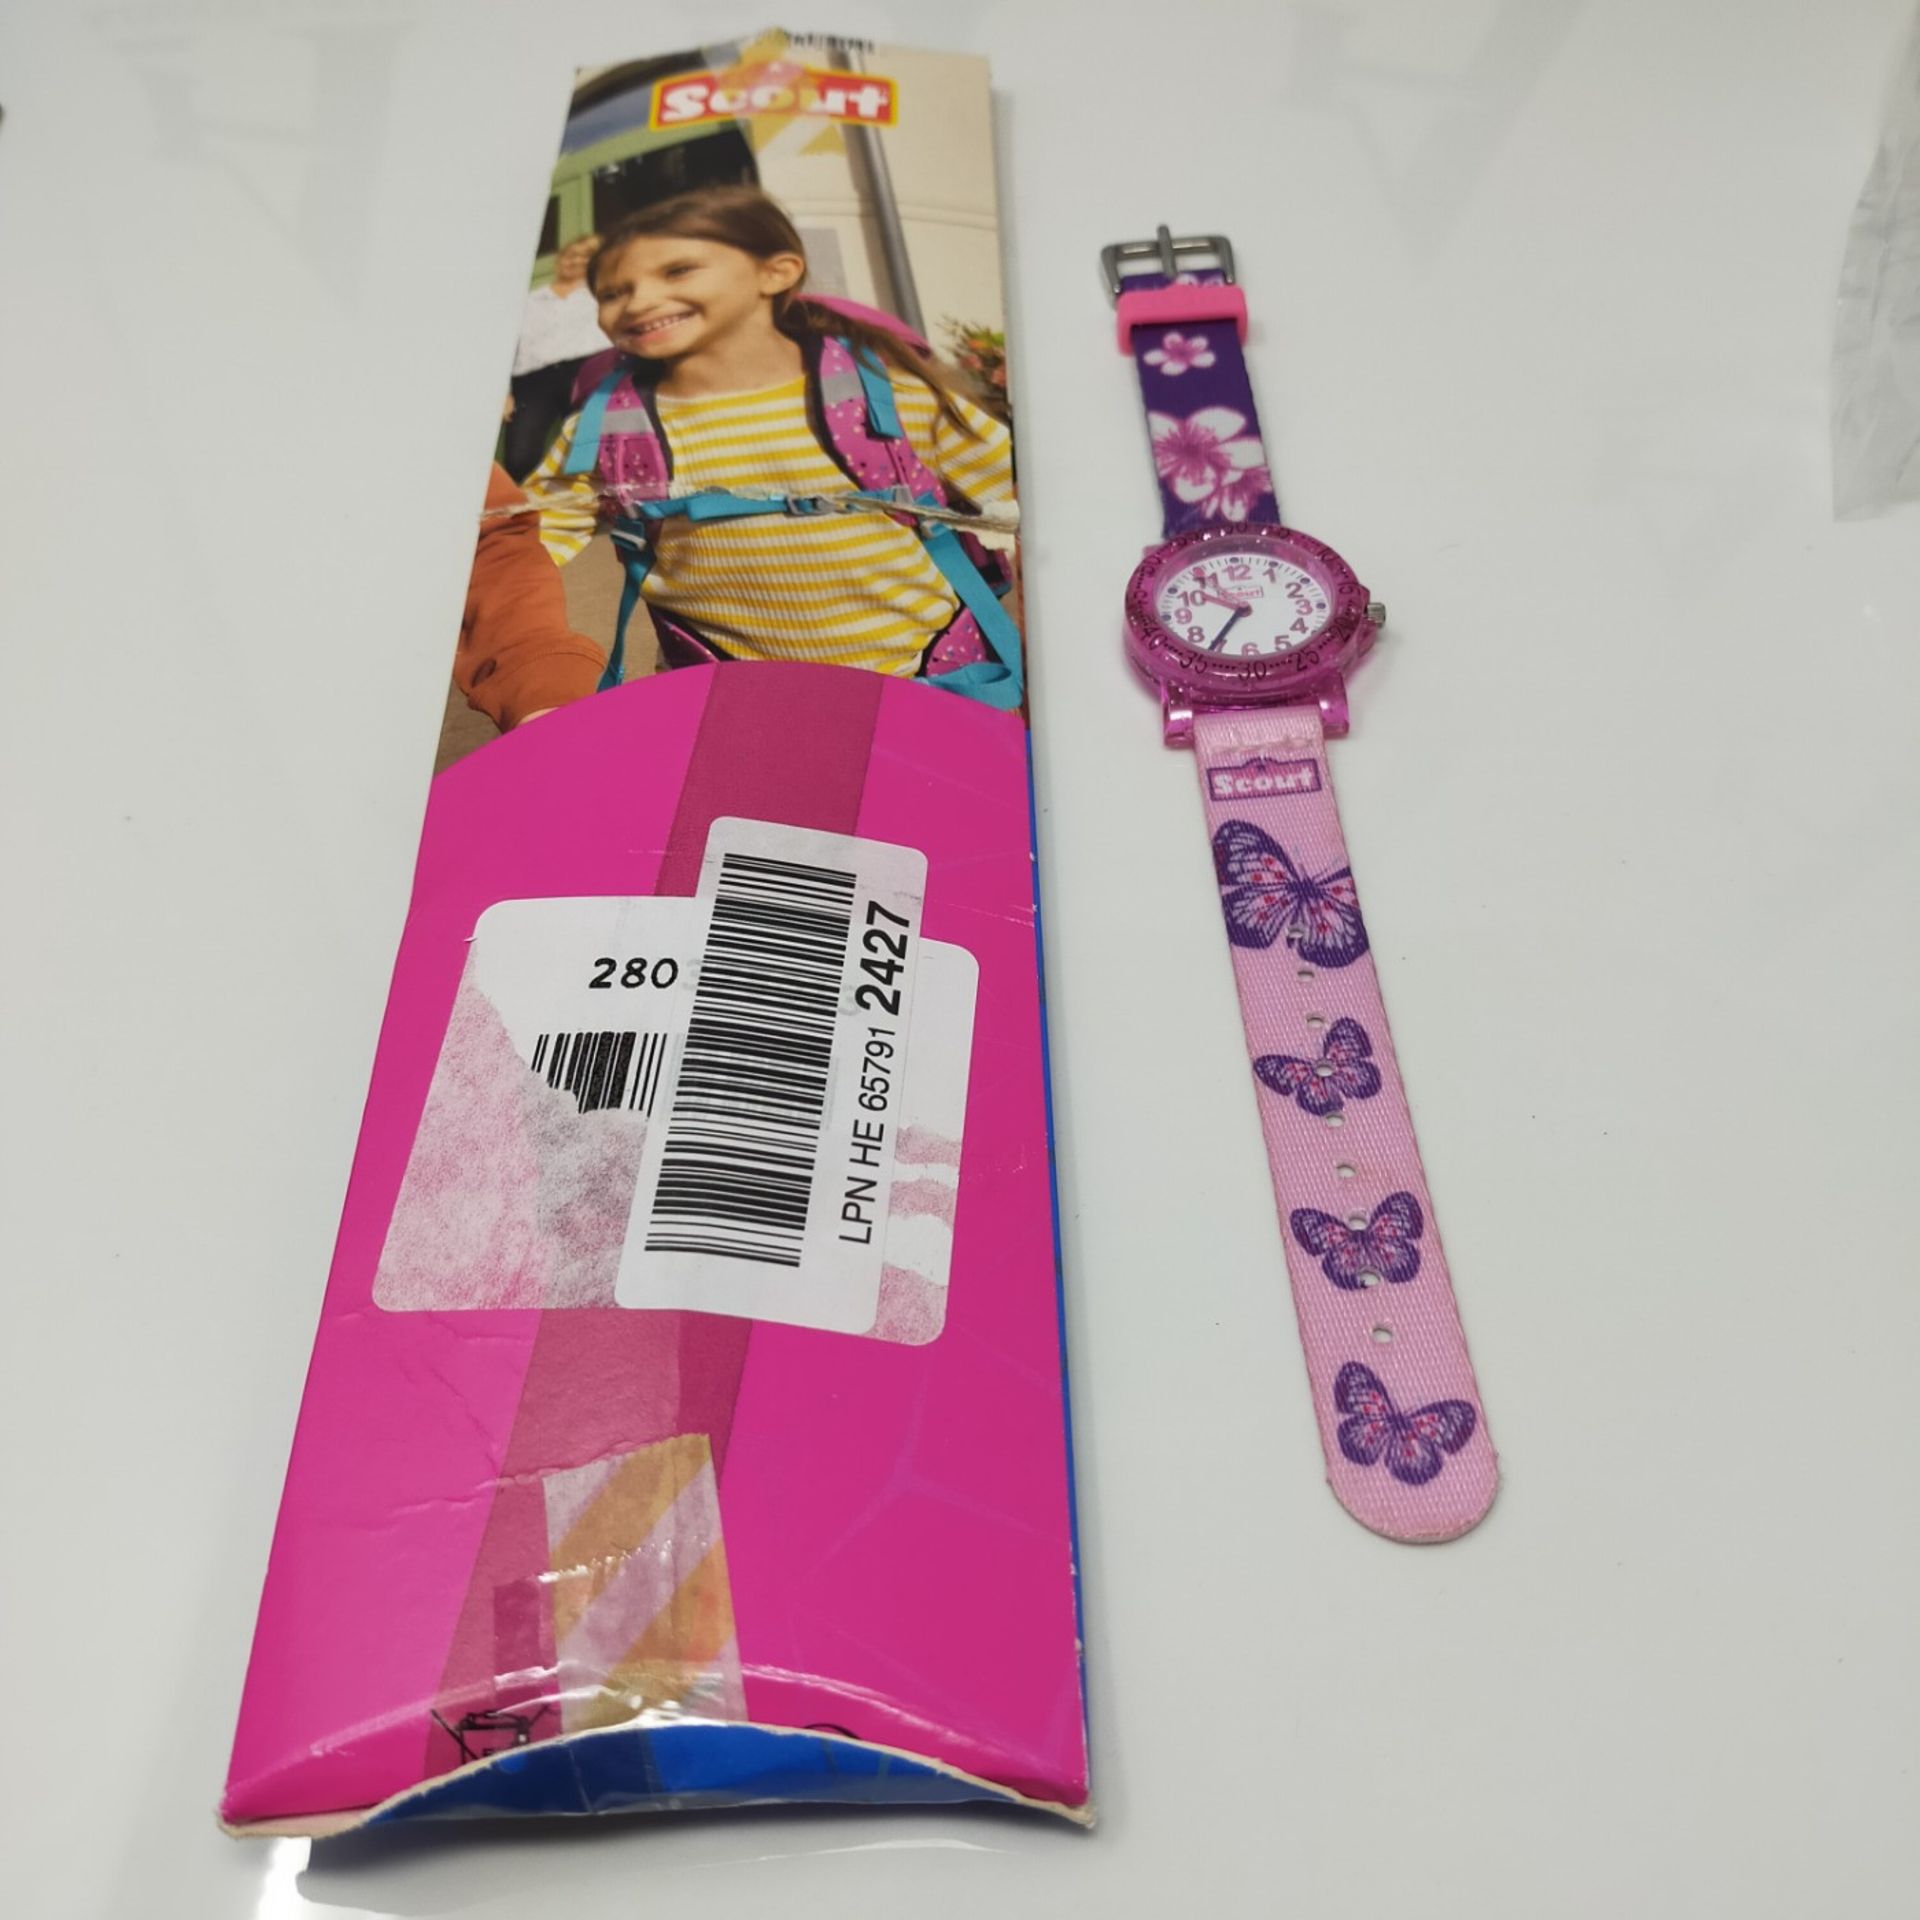 SCOUT Girls Analogue Quartz Watch with Textile Strap 280375013 - Image 2 of 3